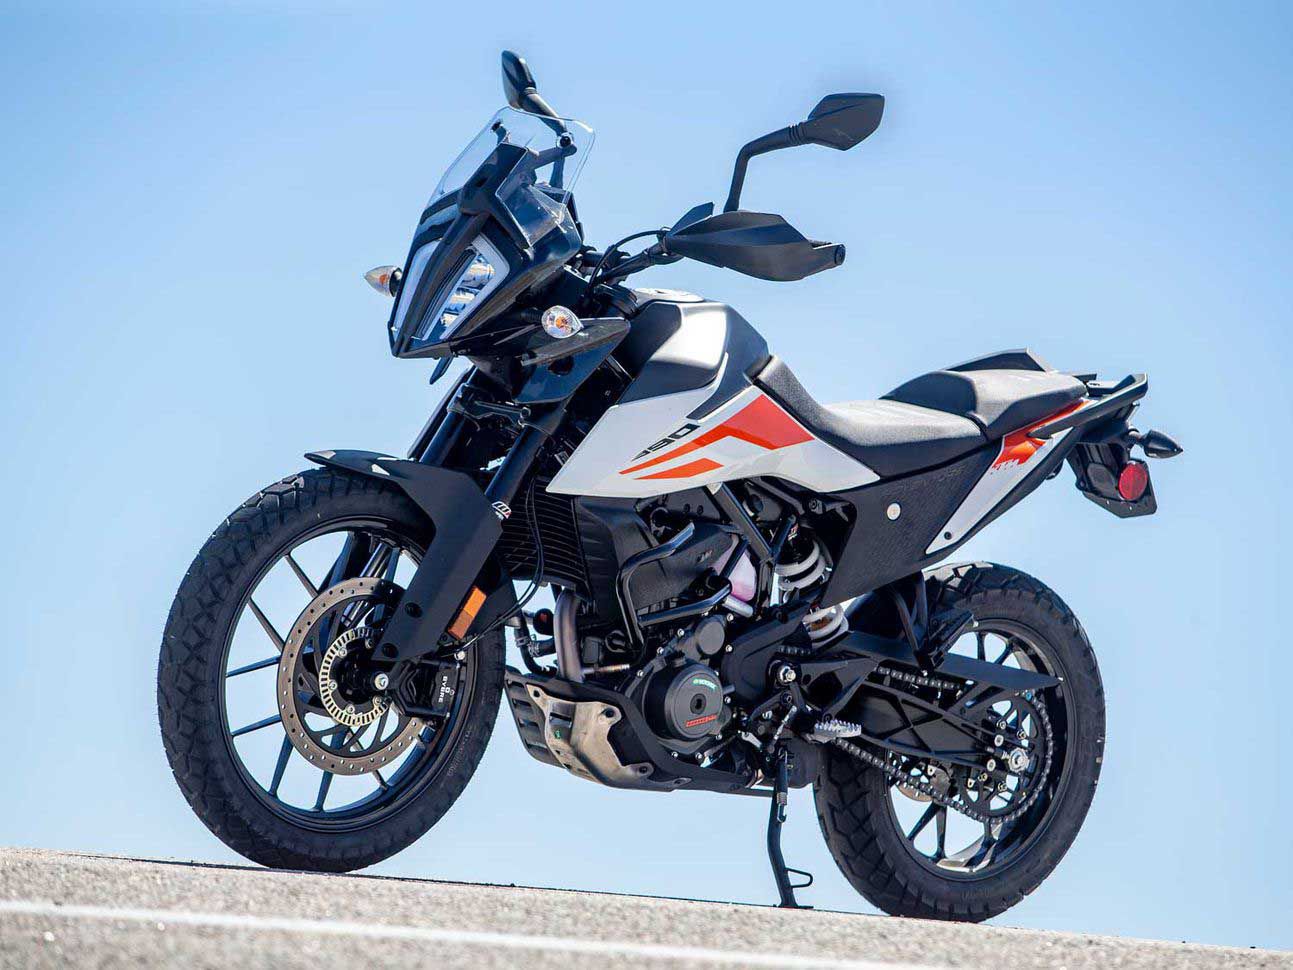 The KTM 390 Adventure is well appointed and a blast to ride, and well worth the few extra dollars you’ll spend.